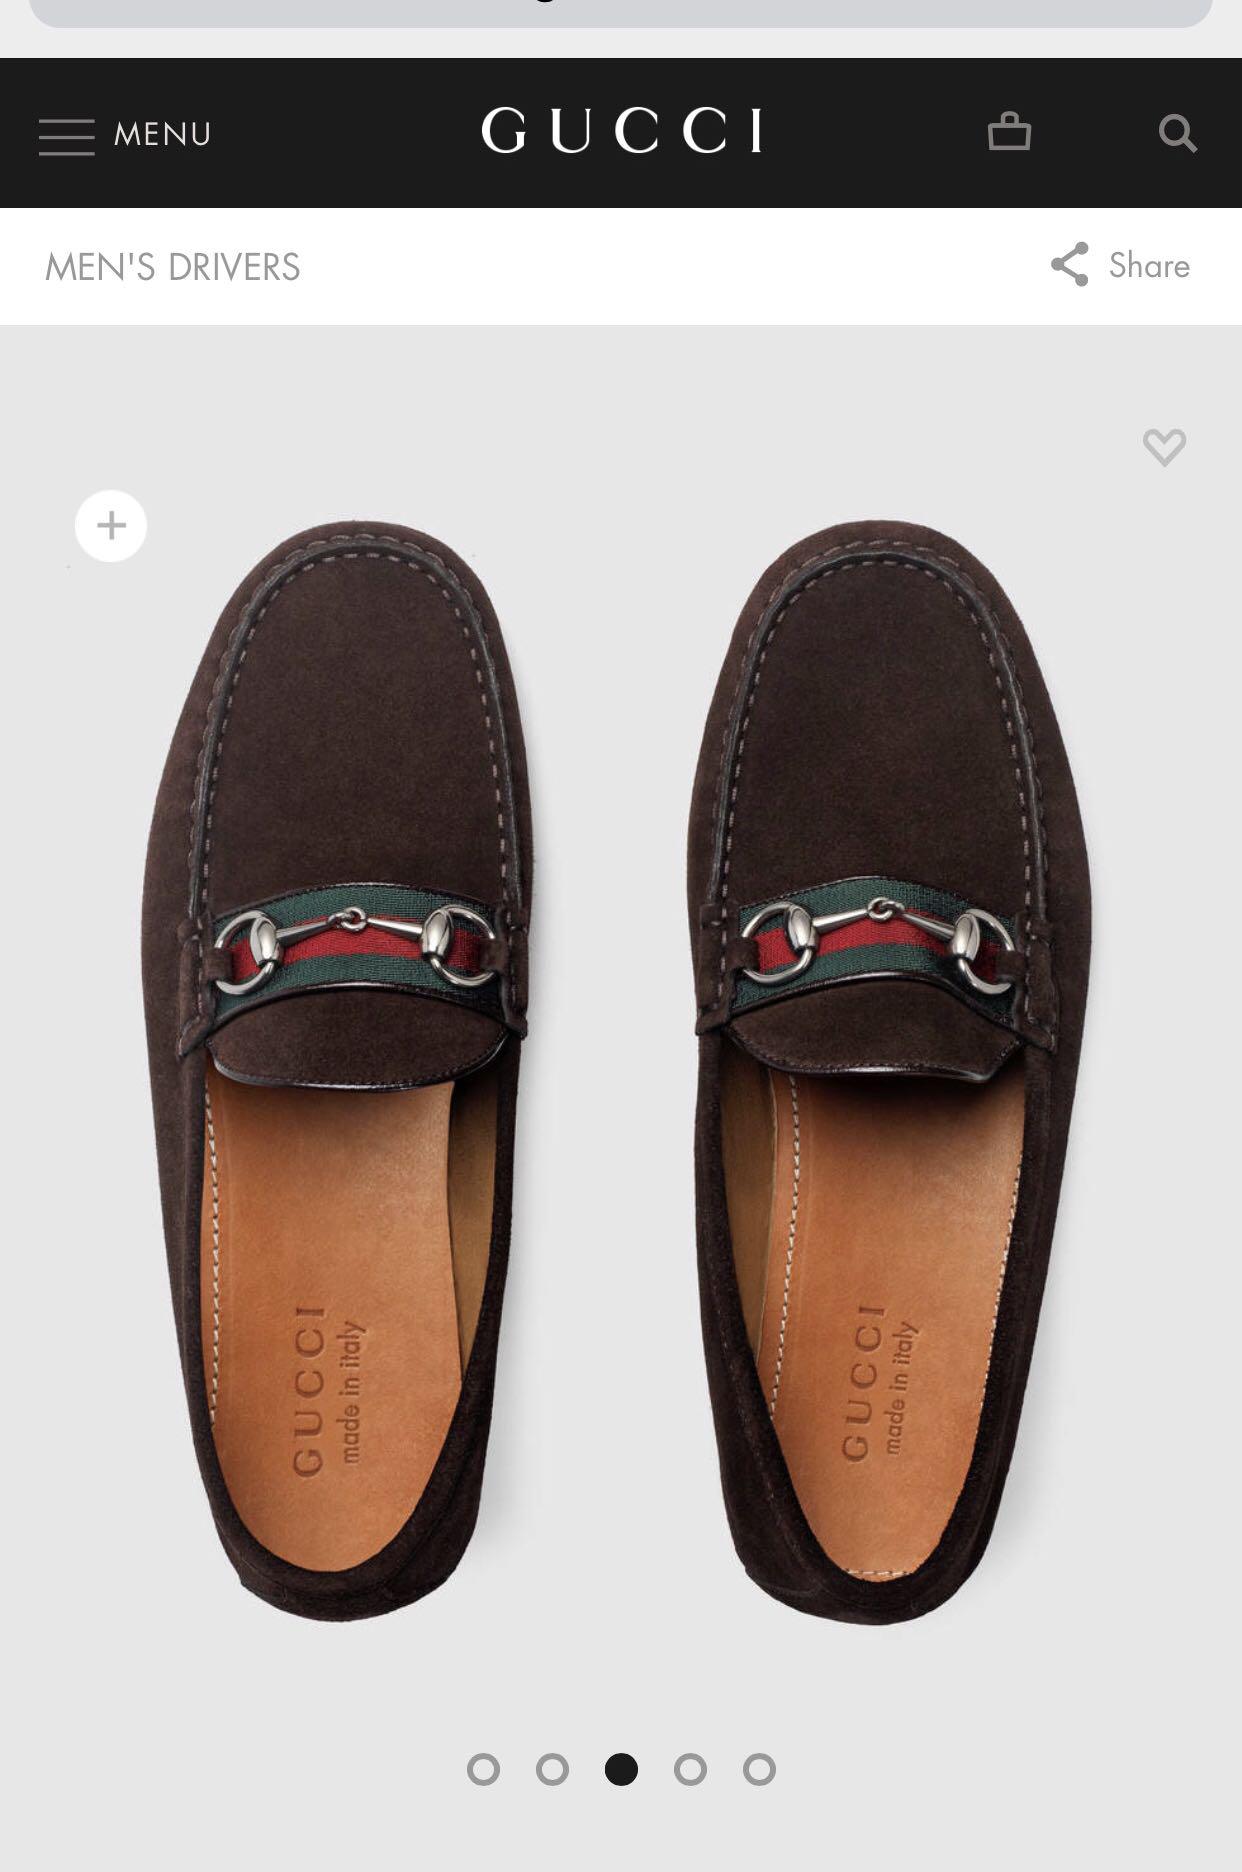 gucci suede driving shoes, OFF 71%,www 